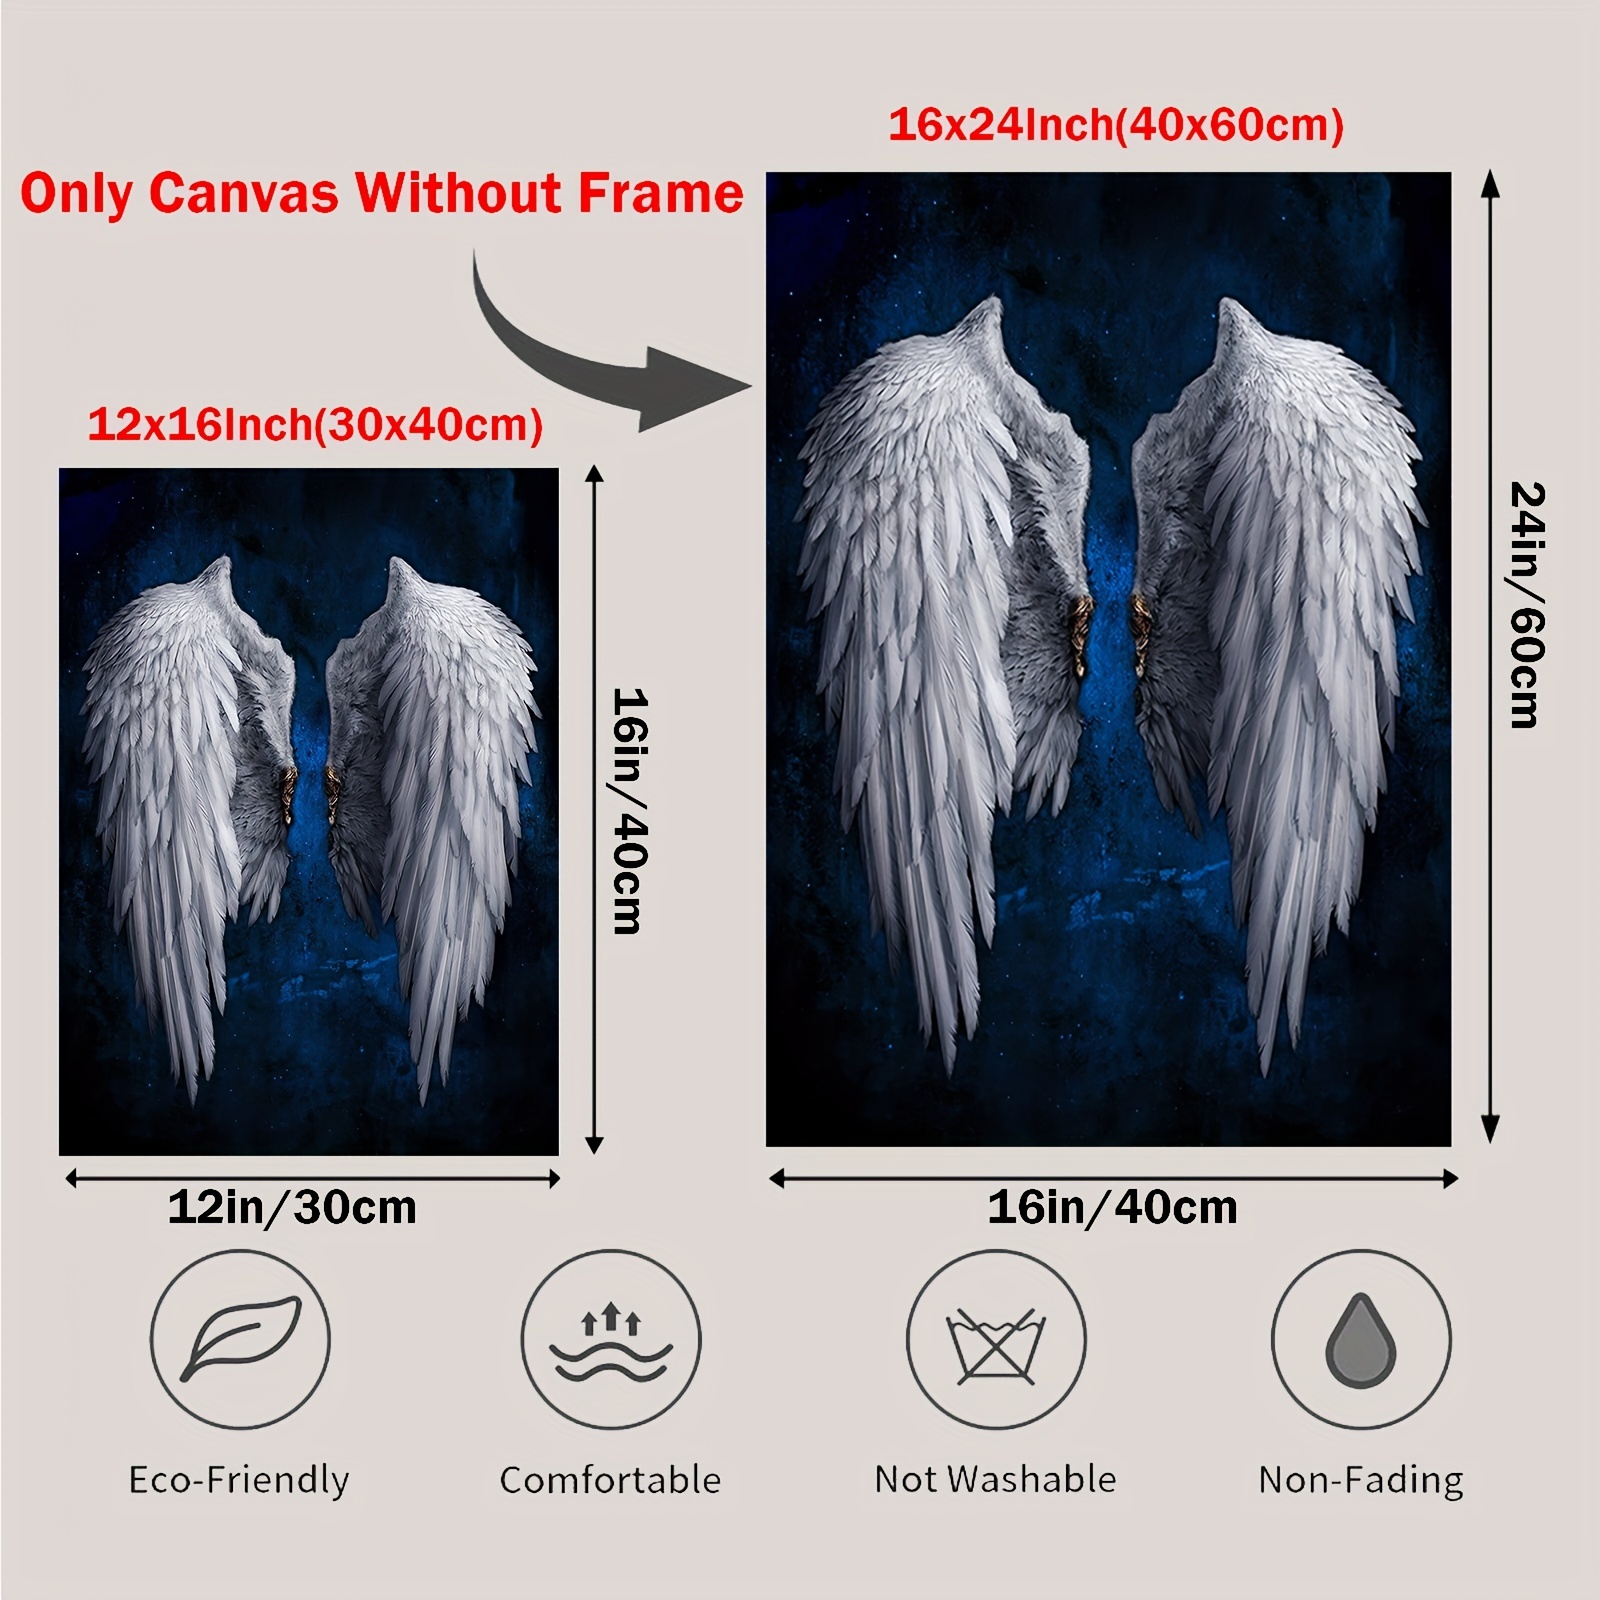 Stunning metal angel wings for crafts for Decor and Souvenirs